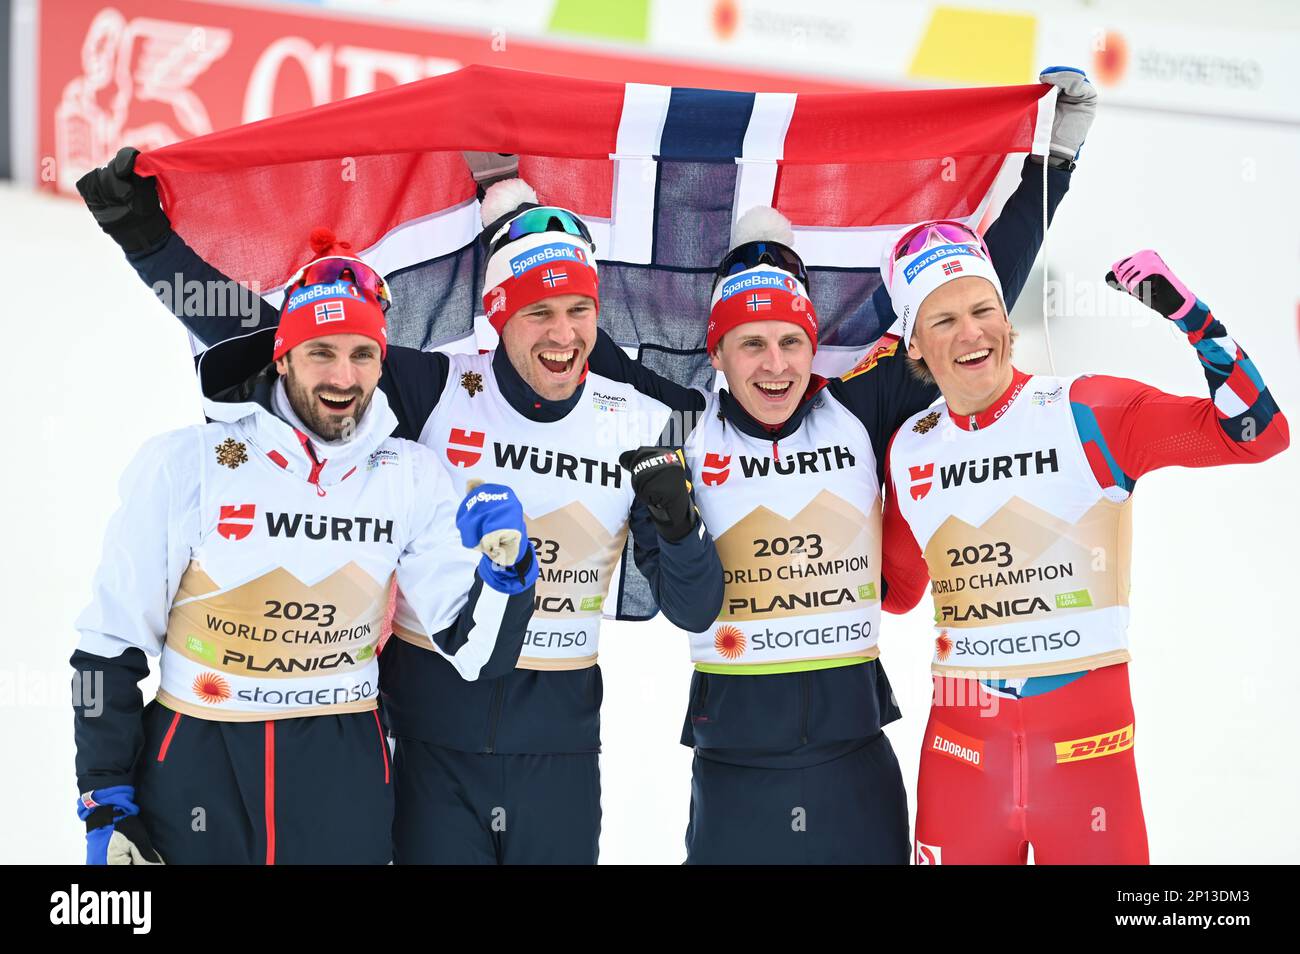 3 March, 2023. Norway's winning team after winning the men's 4x10-K relay at the FIS world cross country ski championships in Planica, Slovenia. From left, Hans Christer Holund, Paal Golberg, Simen Hegstad Krueger, Johannes Hoesflot Klaebo. Credit: John Lazenby/Alamy Live News Stock Photo